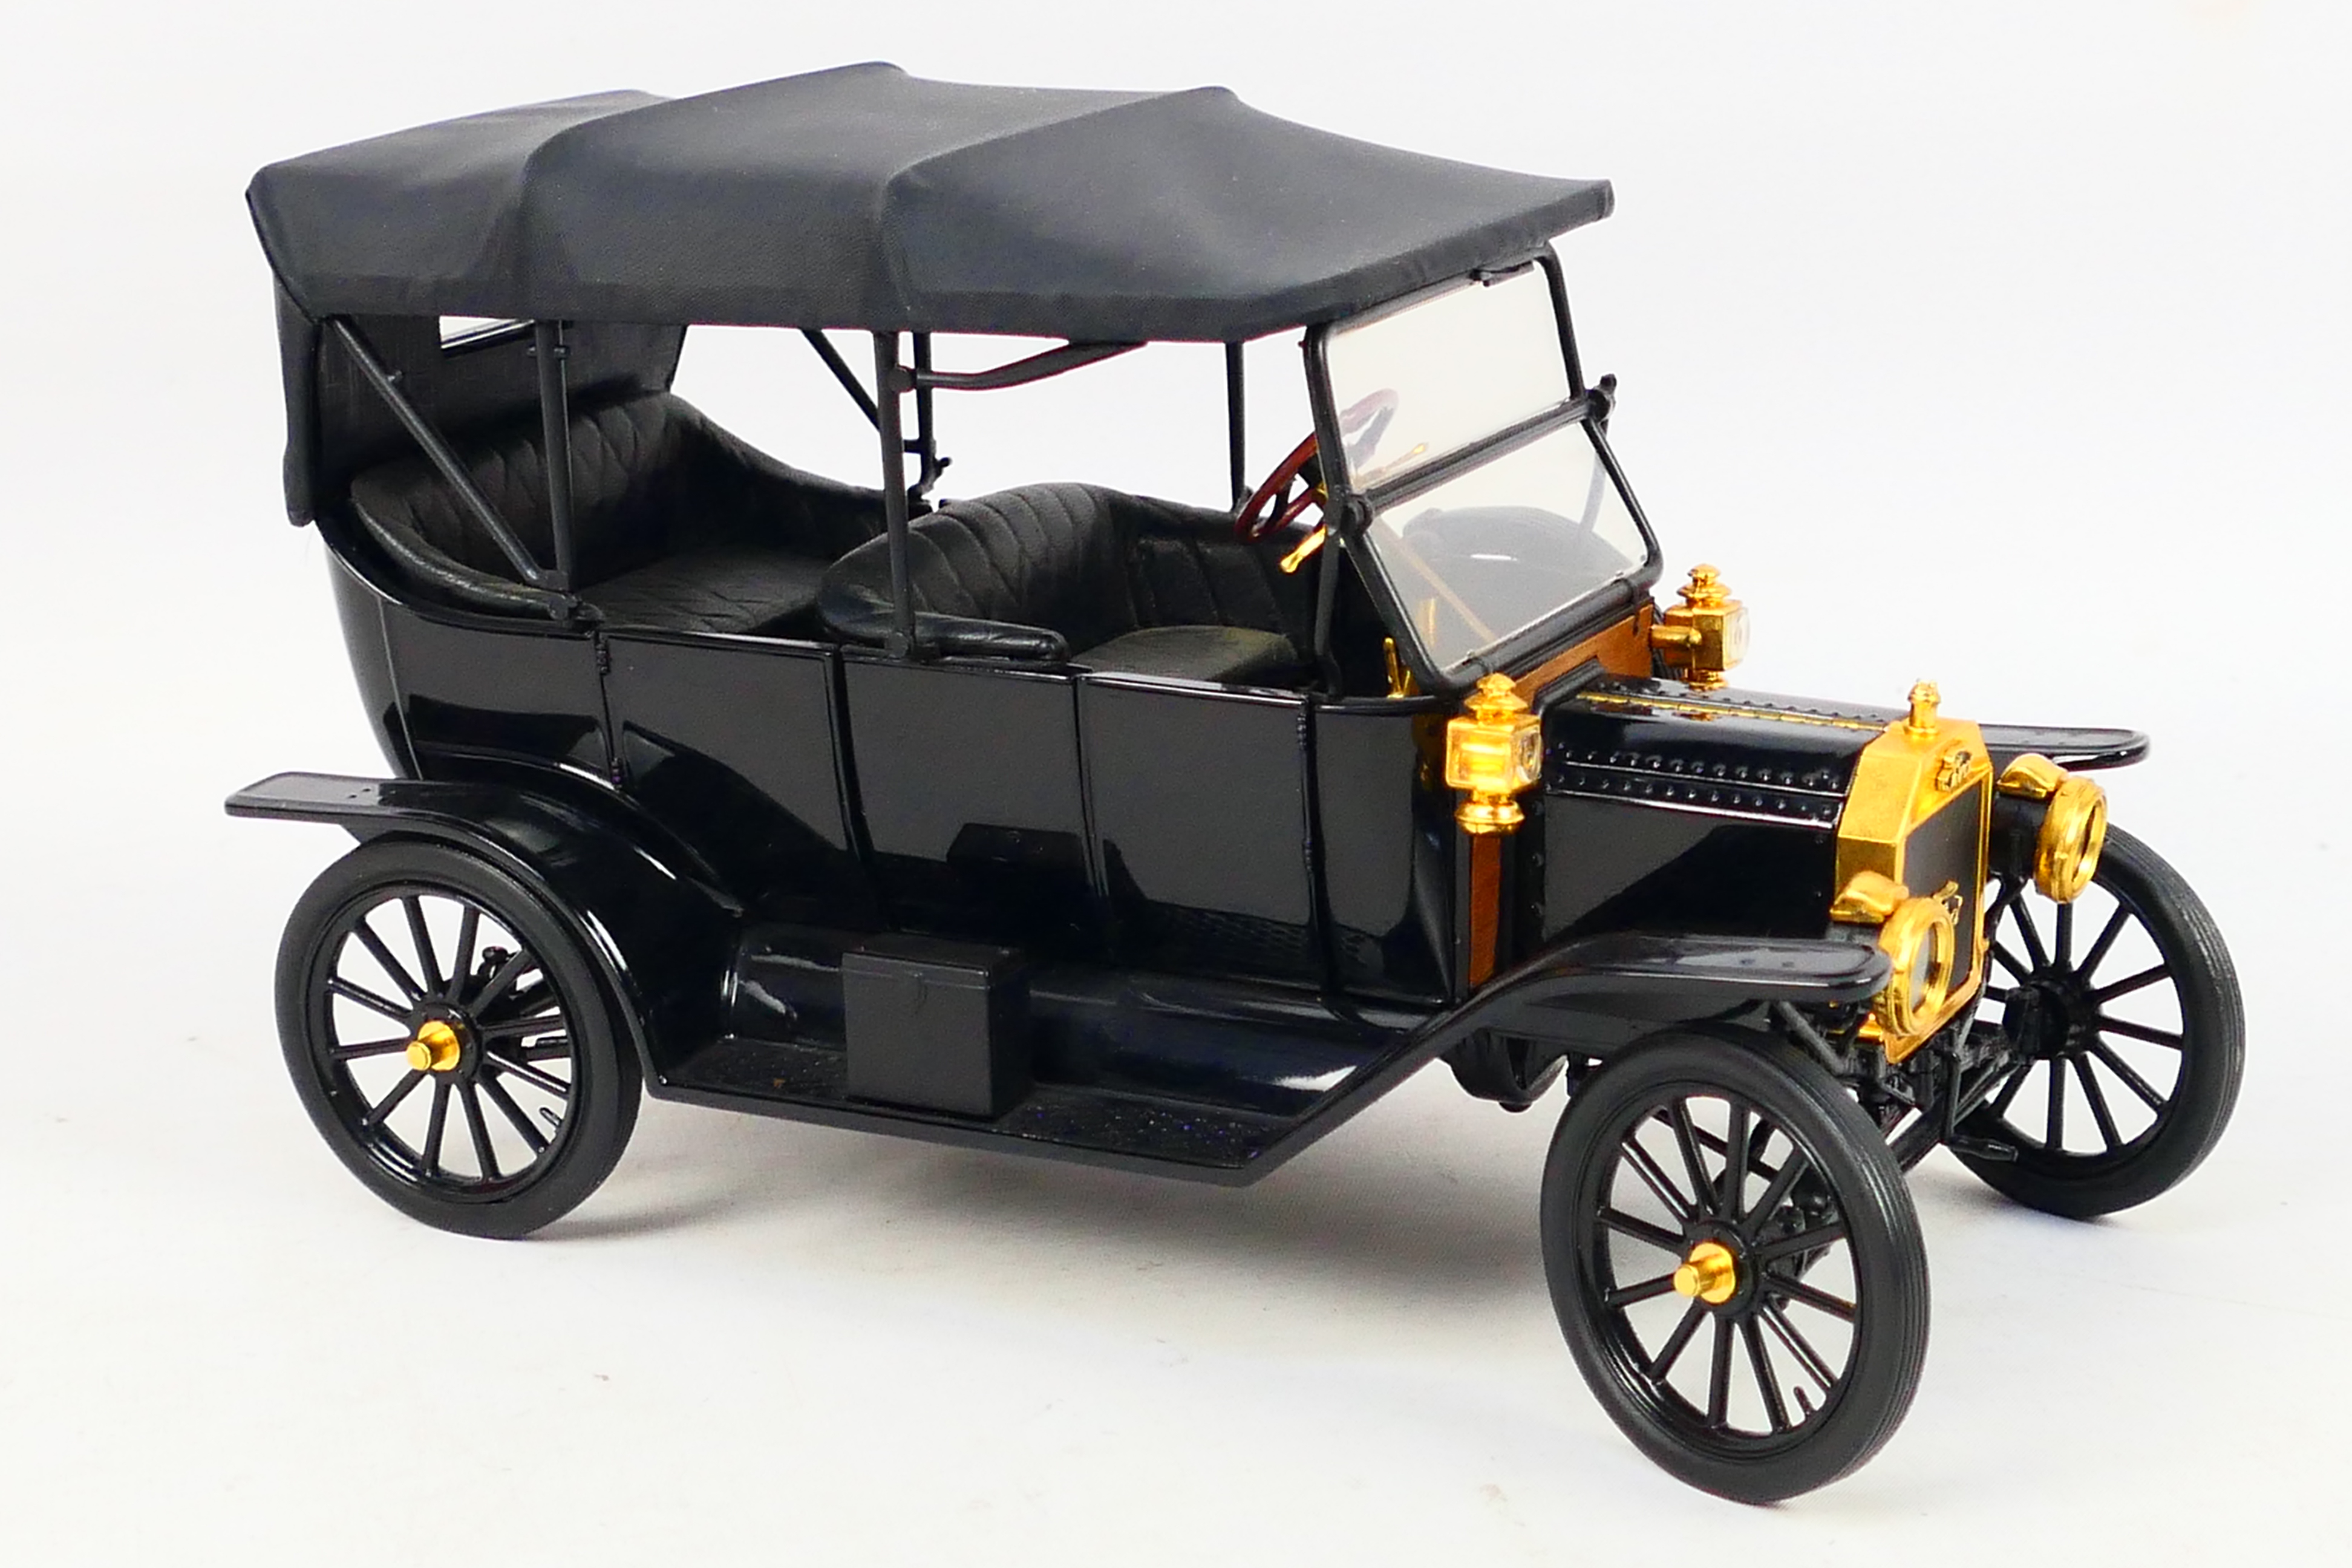 Franklin Mint - A 1:16 scale 1913 Ford Model T. - Image 6 of 9